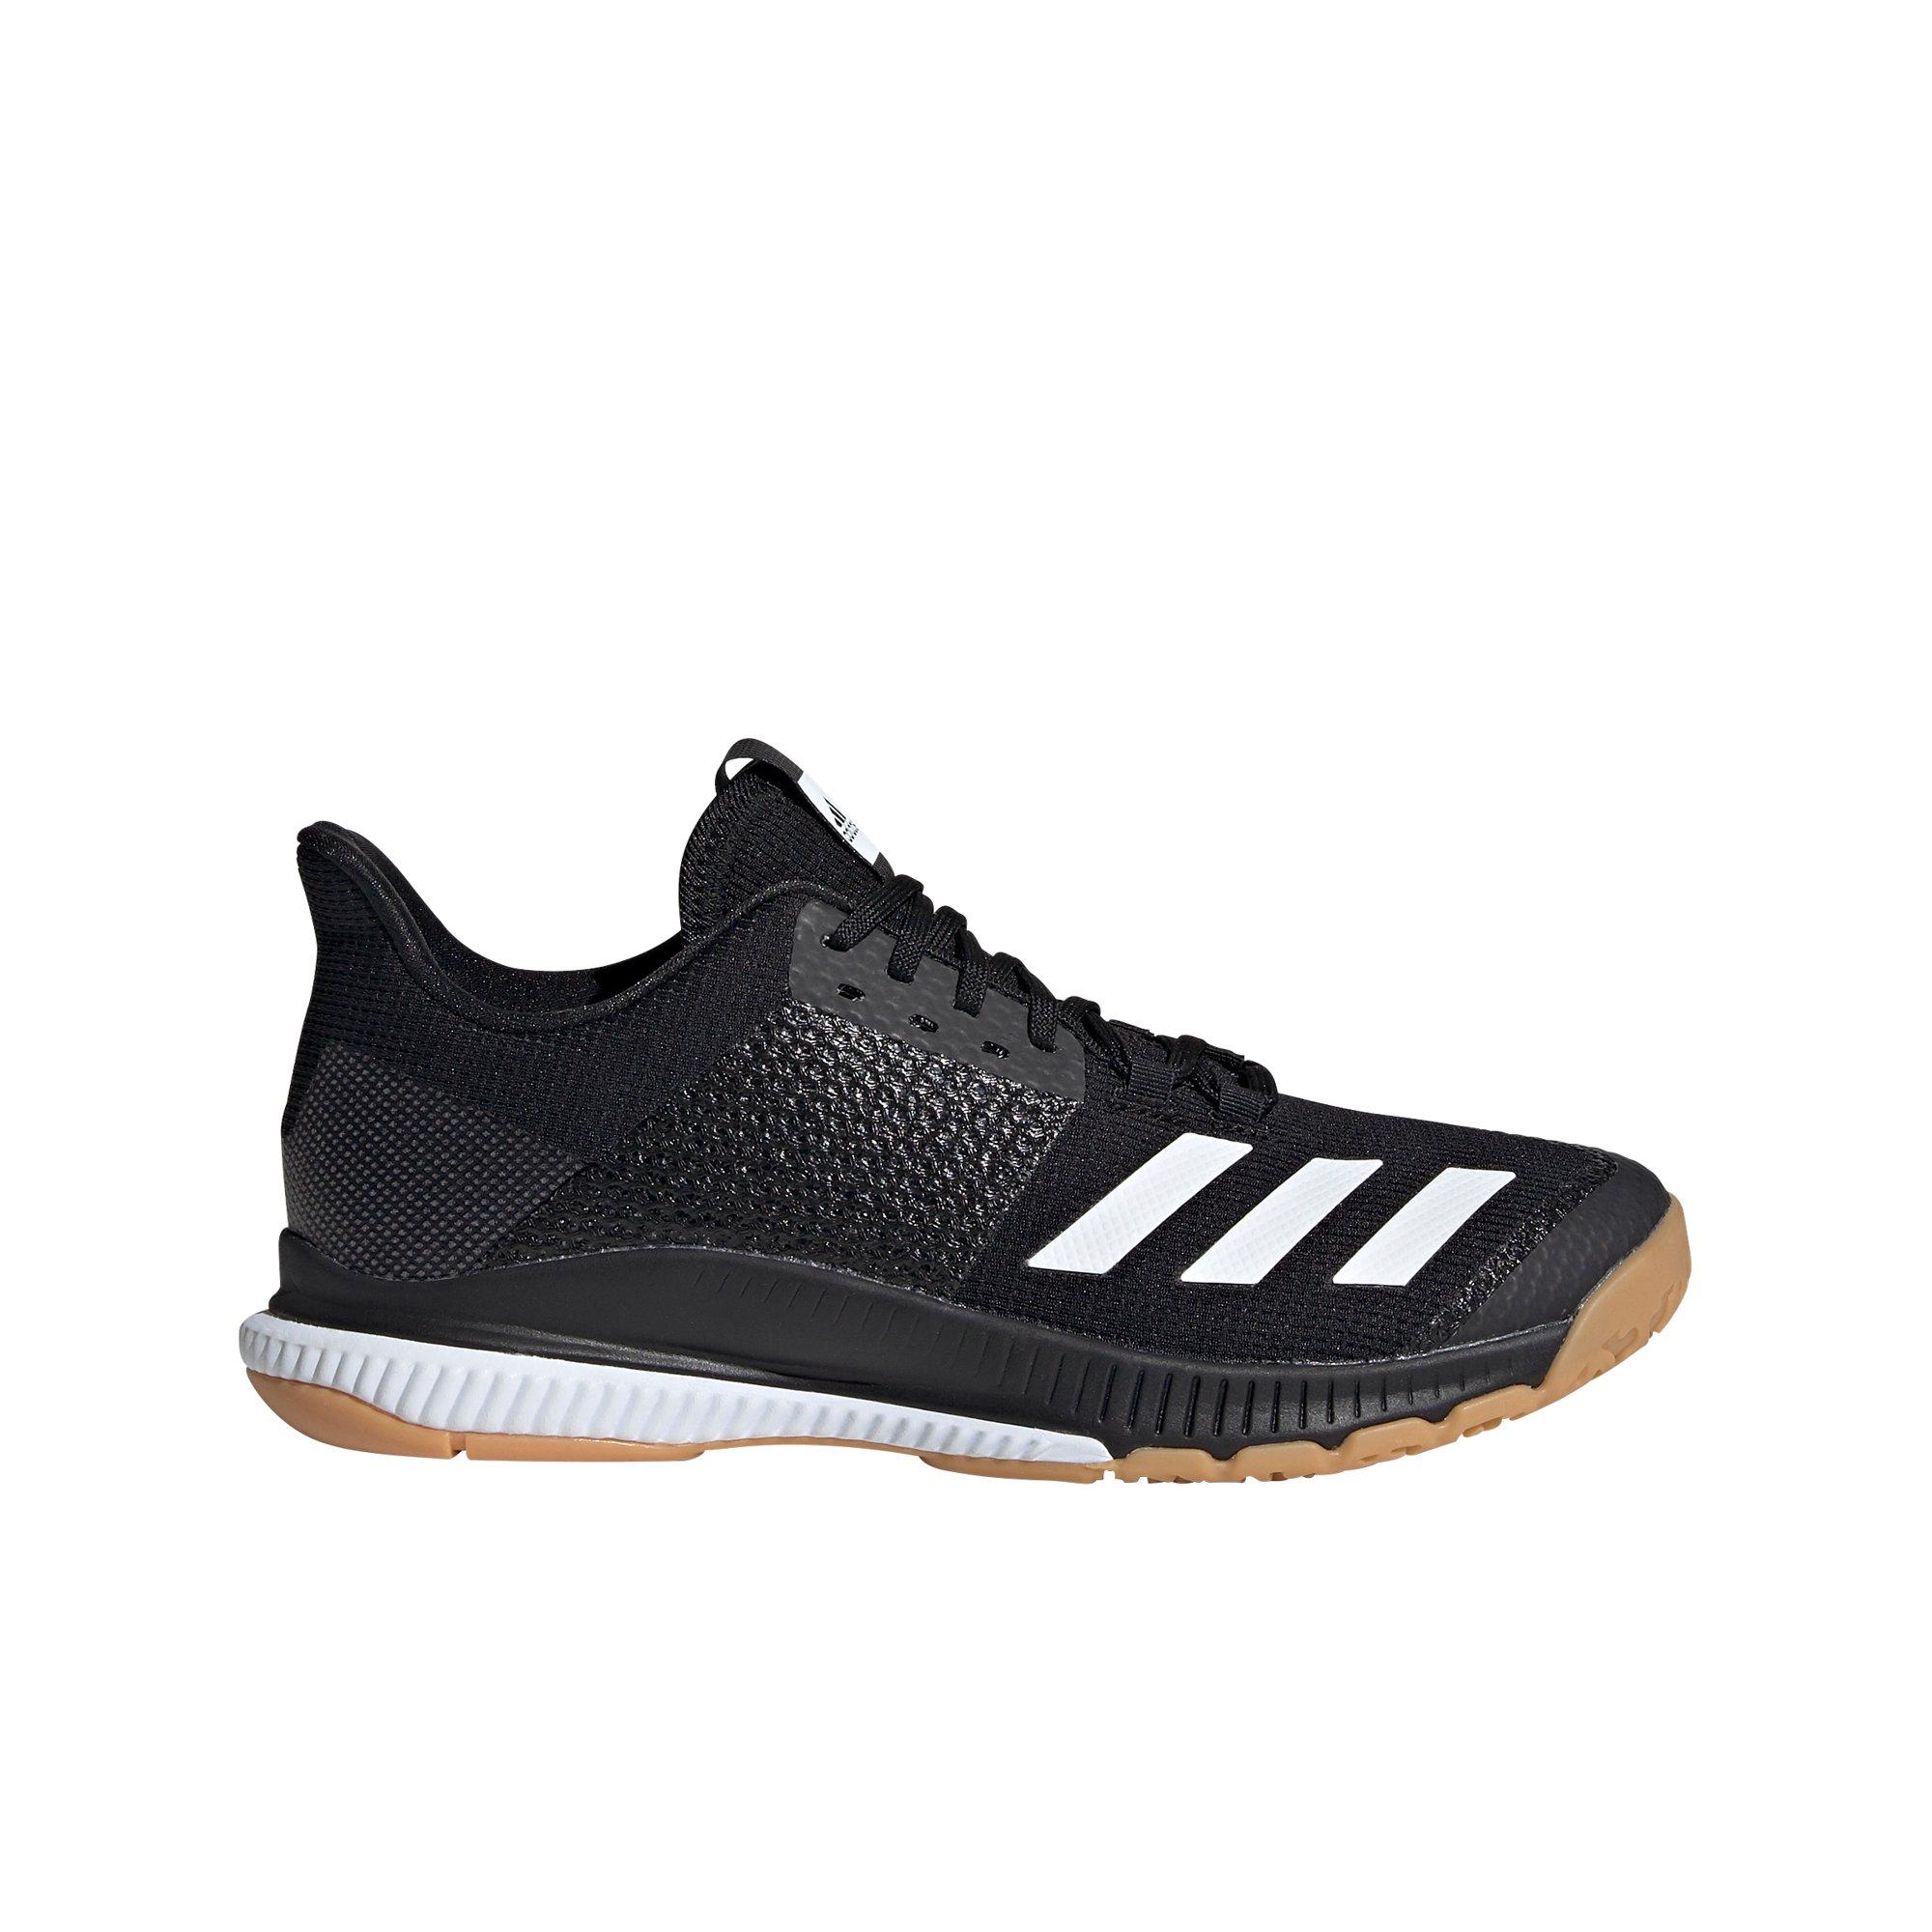 adidas volleyball shoes black